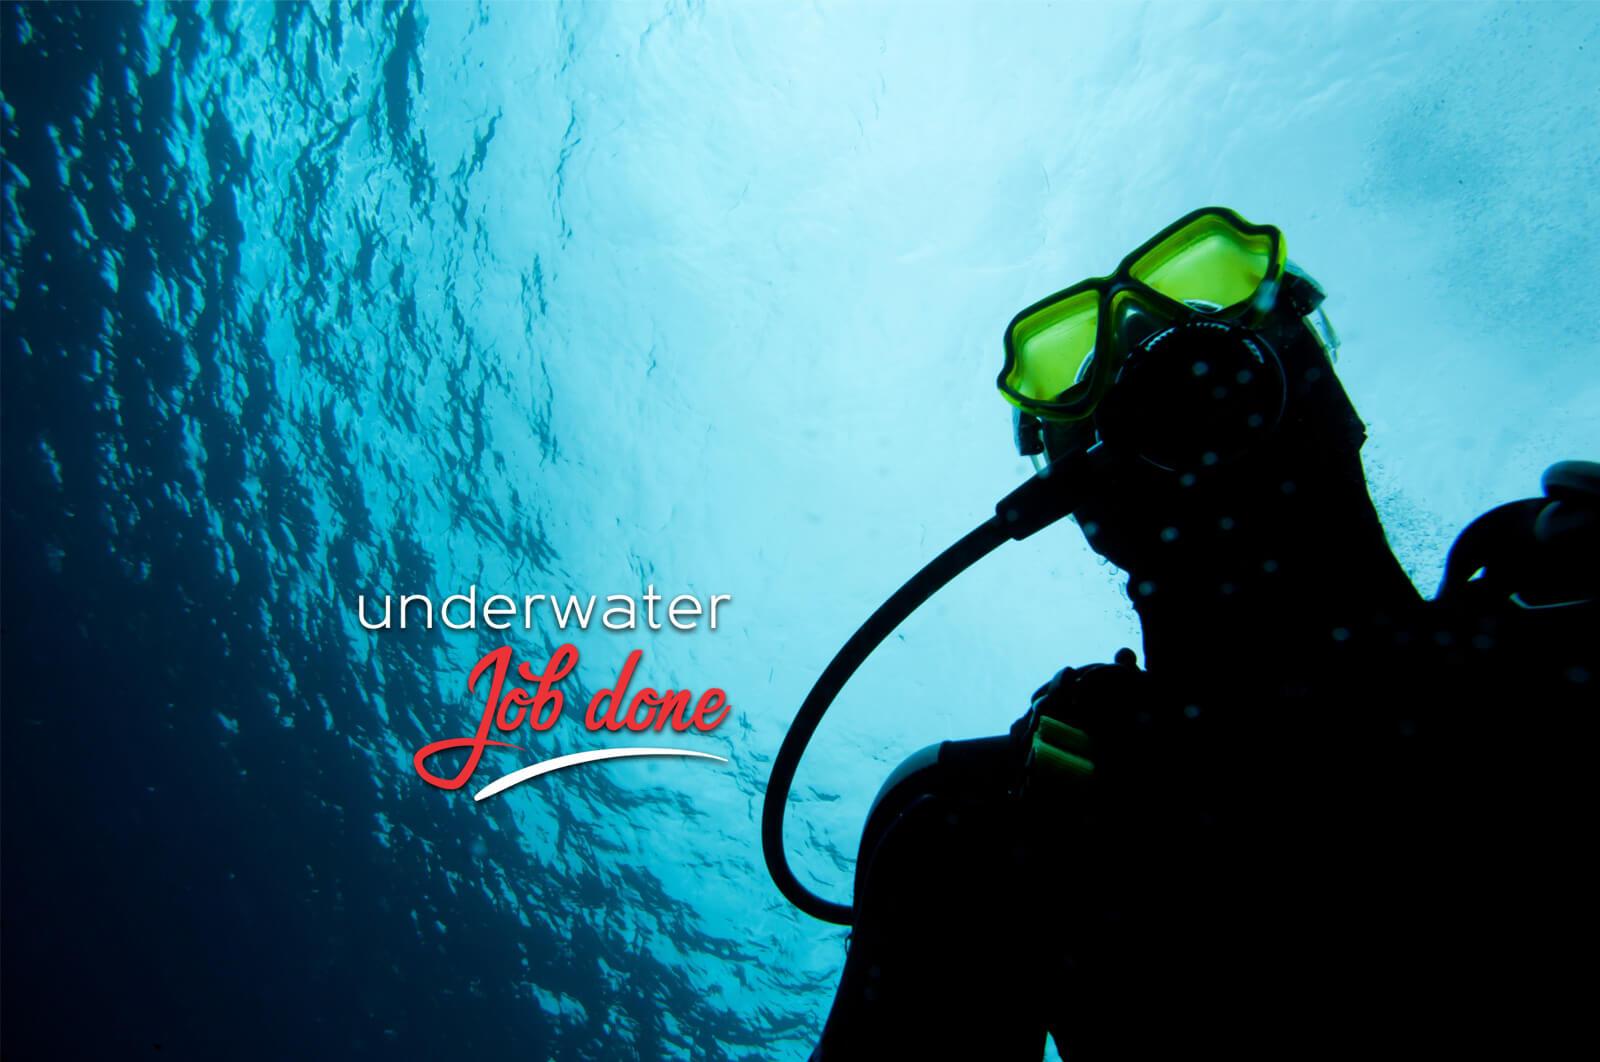 Product ADDITIONAL UNDERWATER SERVICES - CHIOS COMMERCIAL DIVERS - underwater job done image